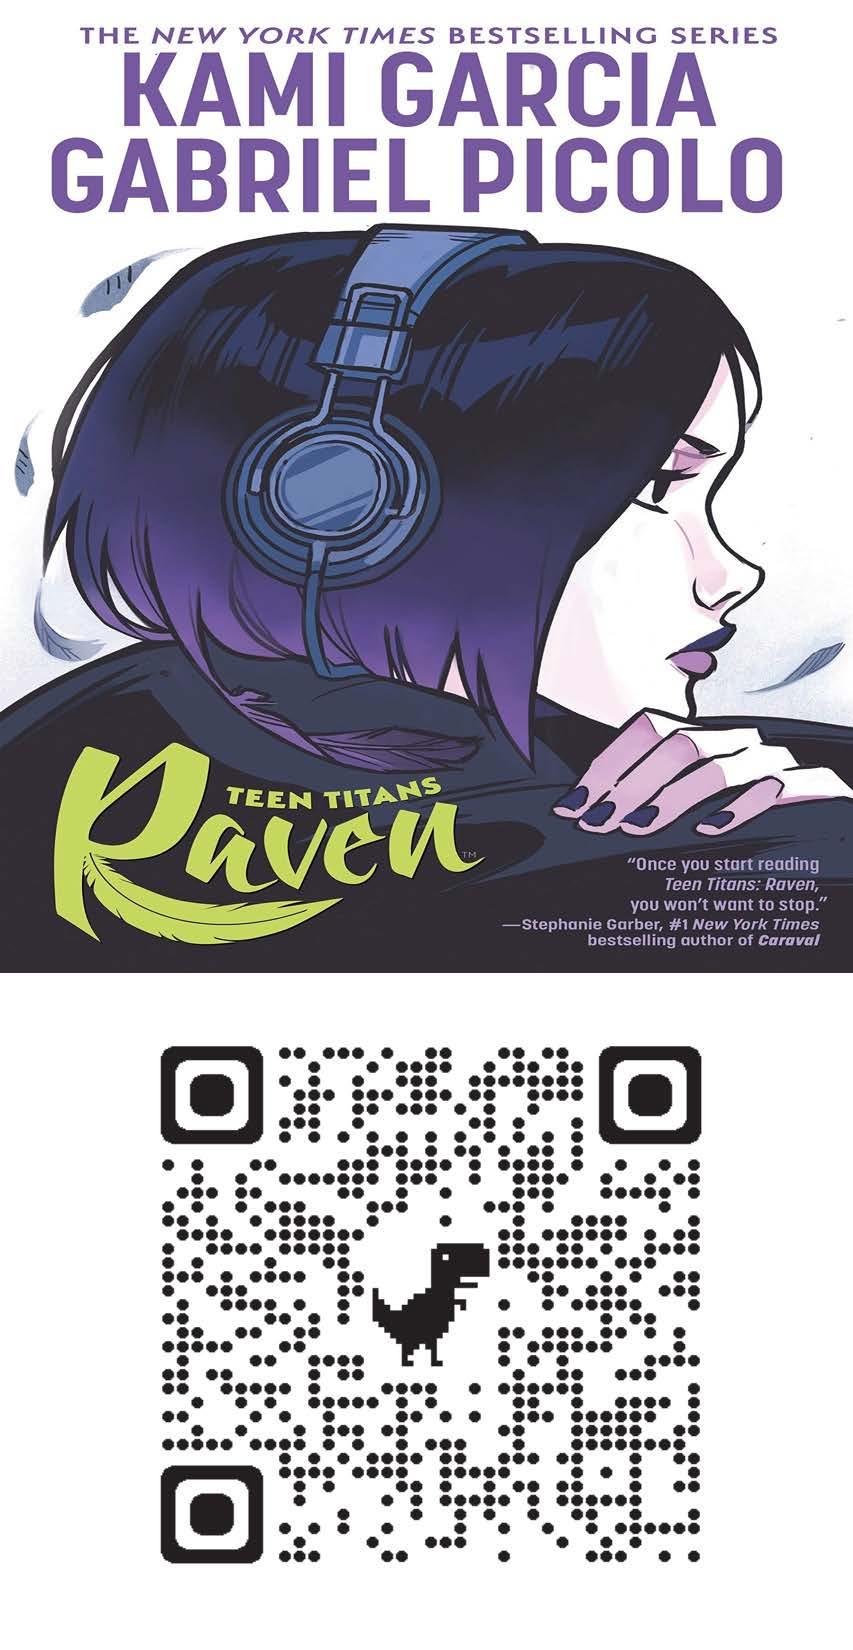 Image of graphic novel "Raven" of DC Comics featuring a girl with short bobbed hair that is purplish in color. She is sitting in profile and has earphones on. Under the book cover is a QR code for people to scan to download the book through Hoopla.